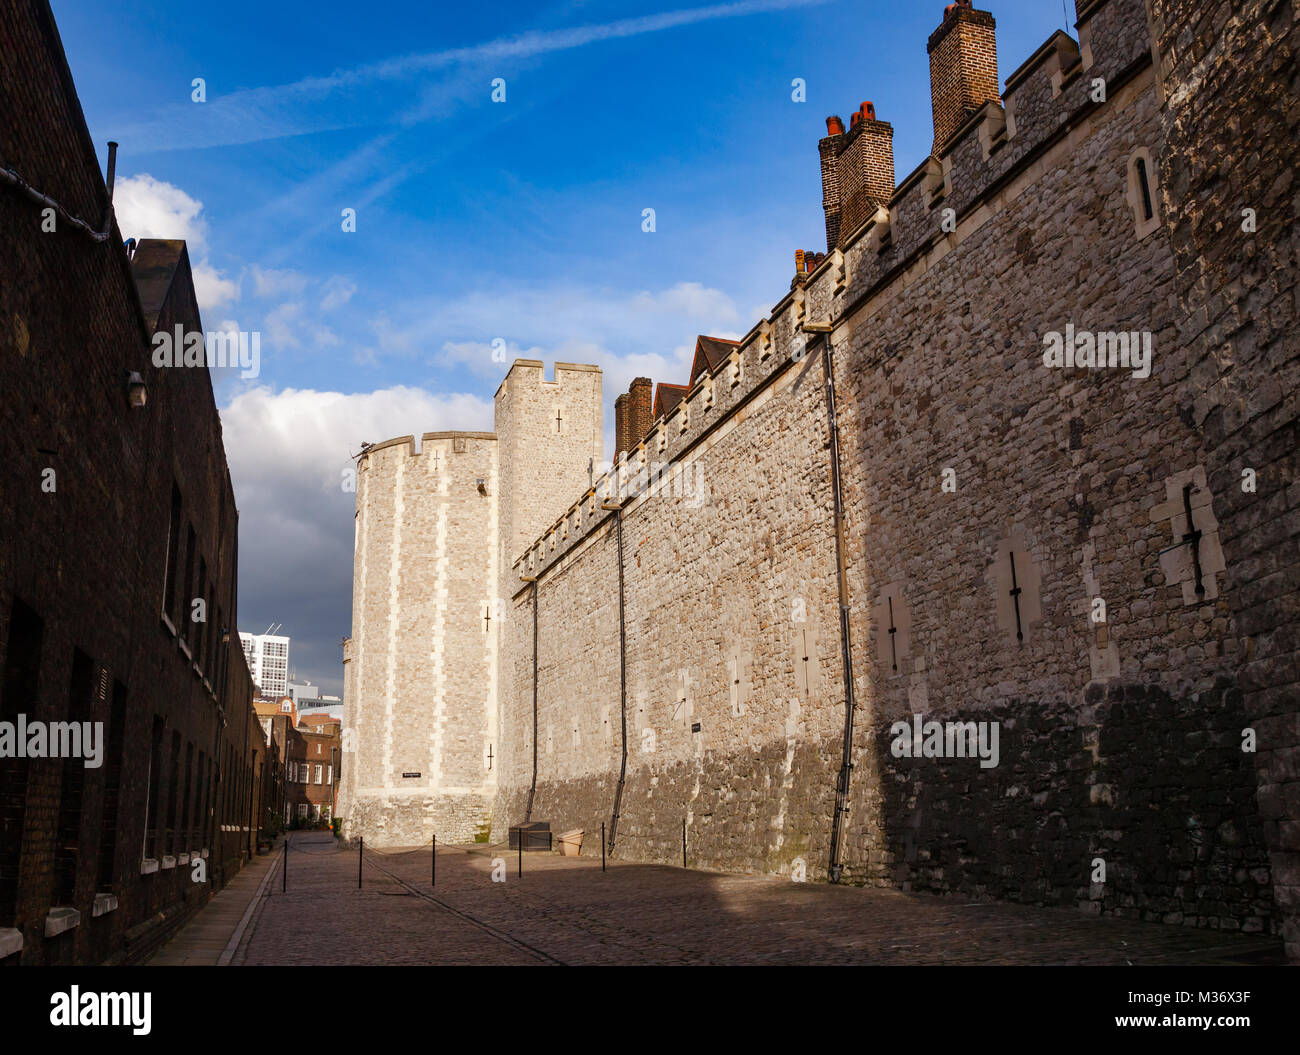 The Mint Street of Tower of London, a historic castle and popular tourist attraction on the north bank of the River Thames in central London England U Stock Photo